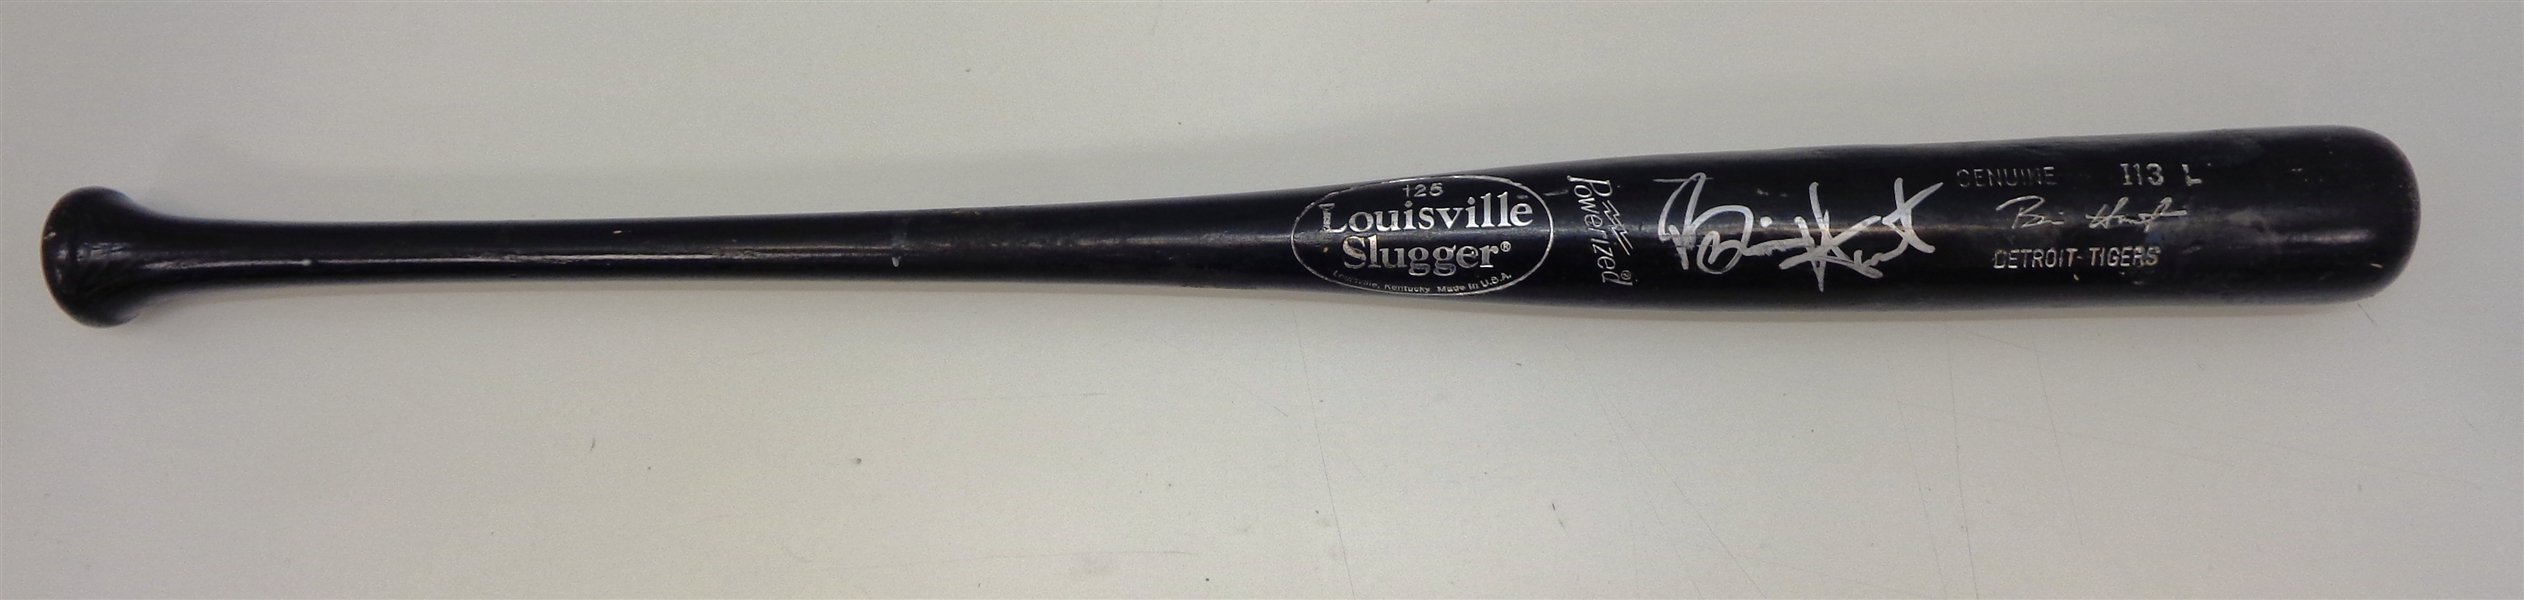 Brian Hunter Game Used Autographed Bat